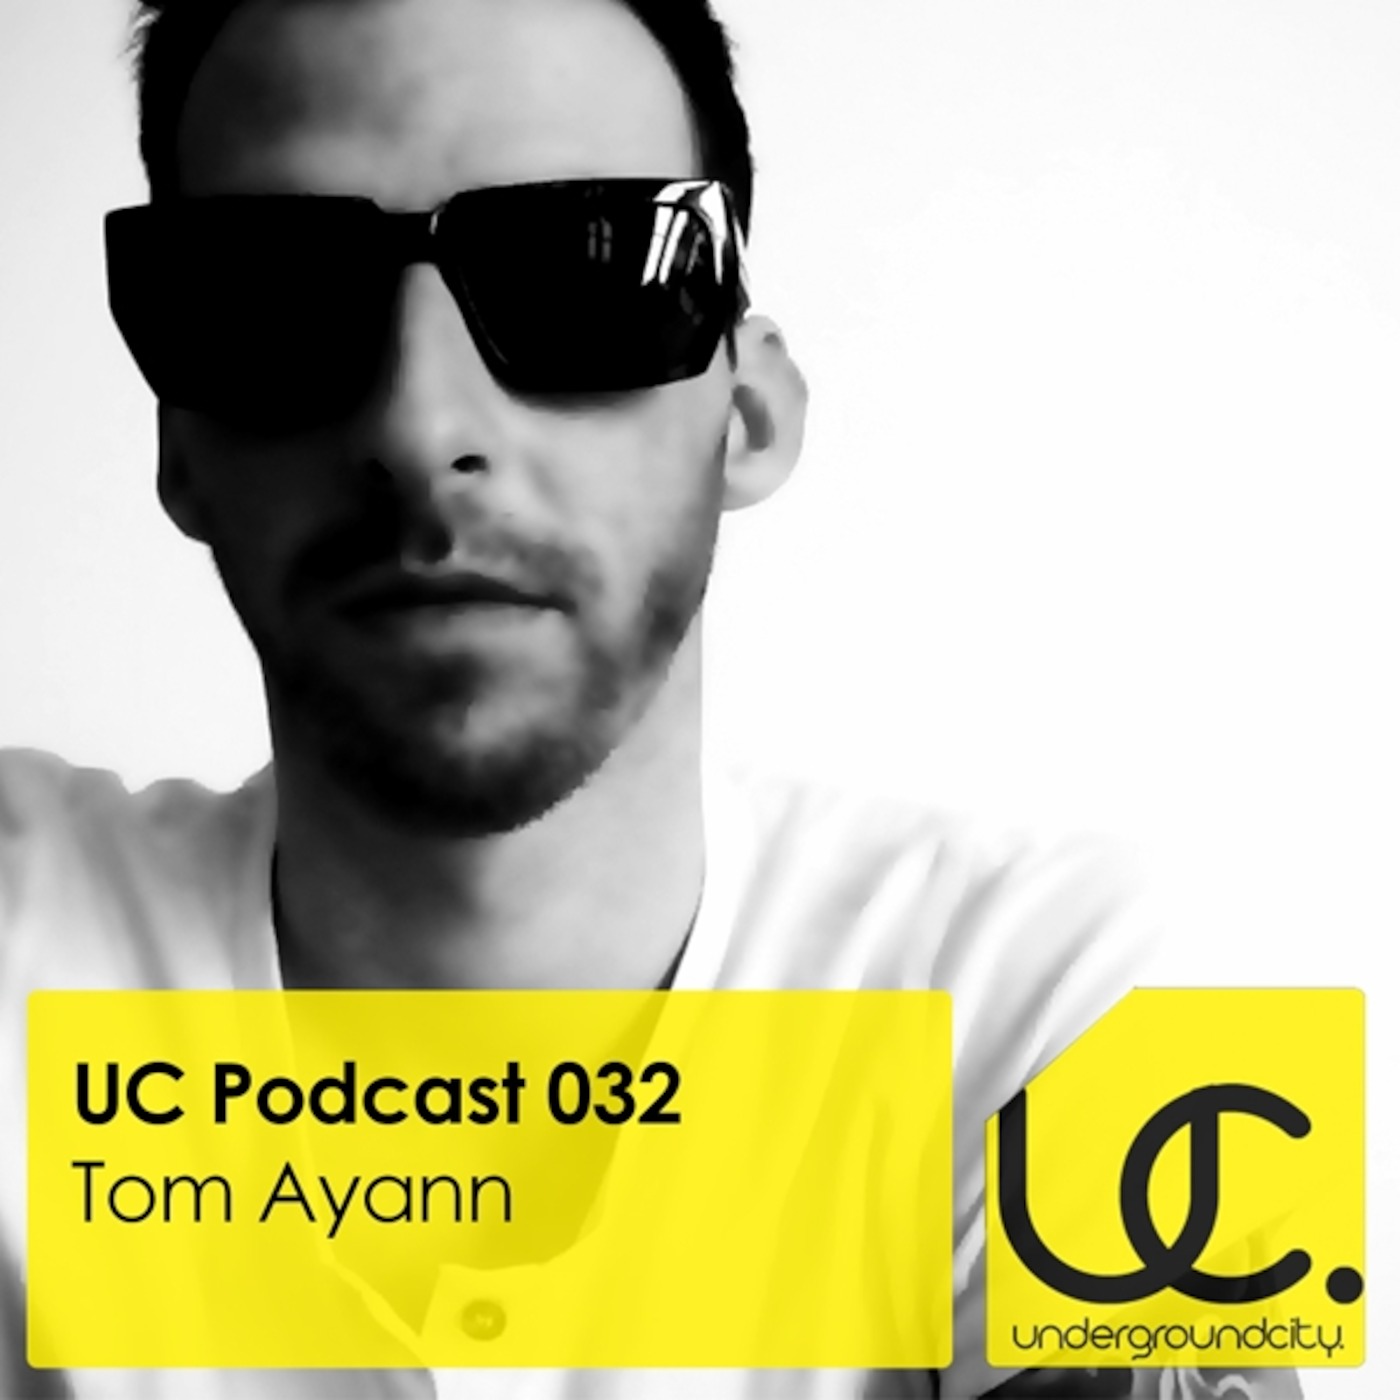 UC Podcast 032 by Tom Ayann